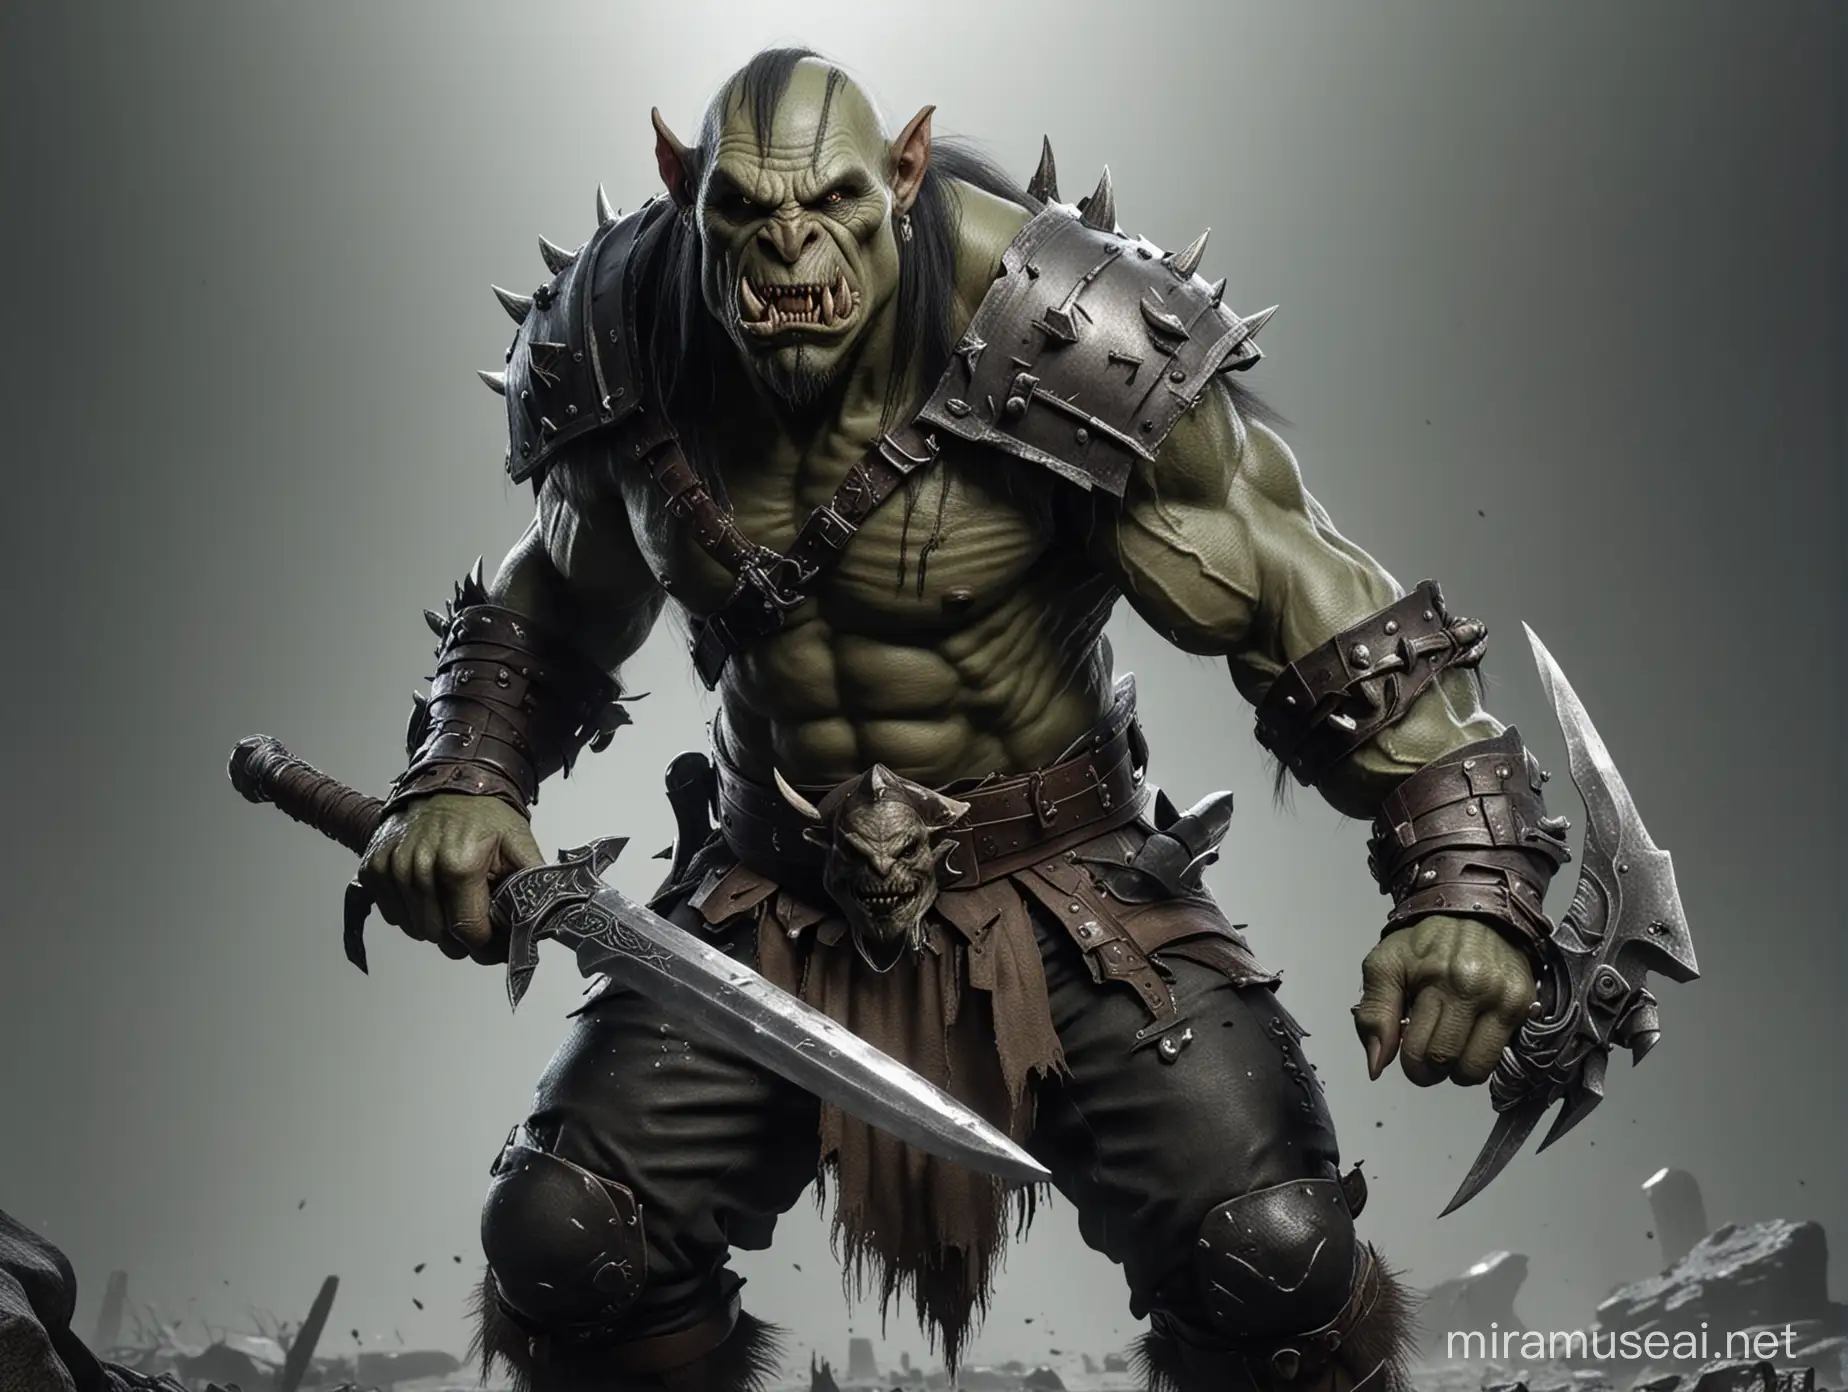 Photorealistic Scary Orc Wielding a Colossal Sword